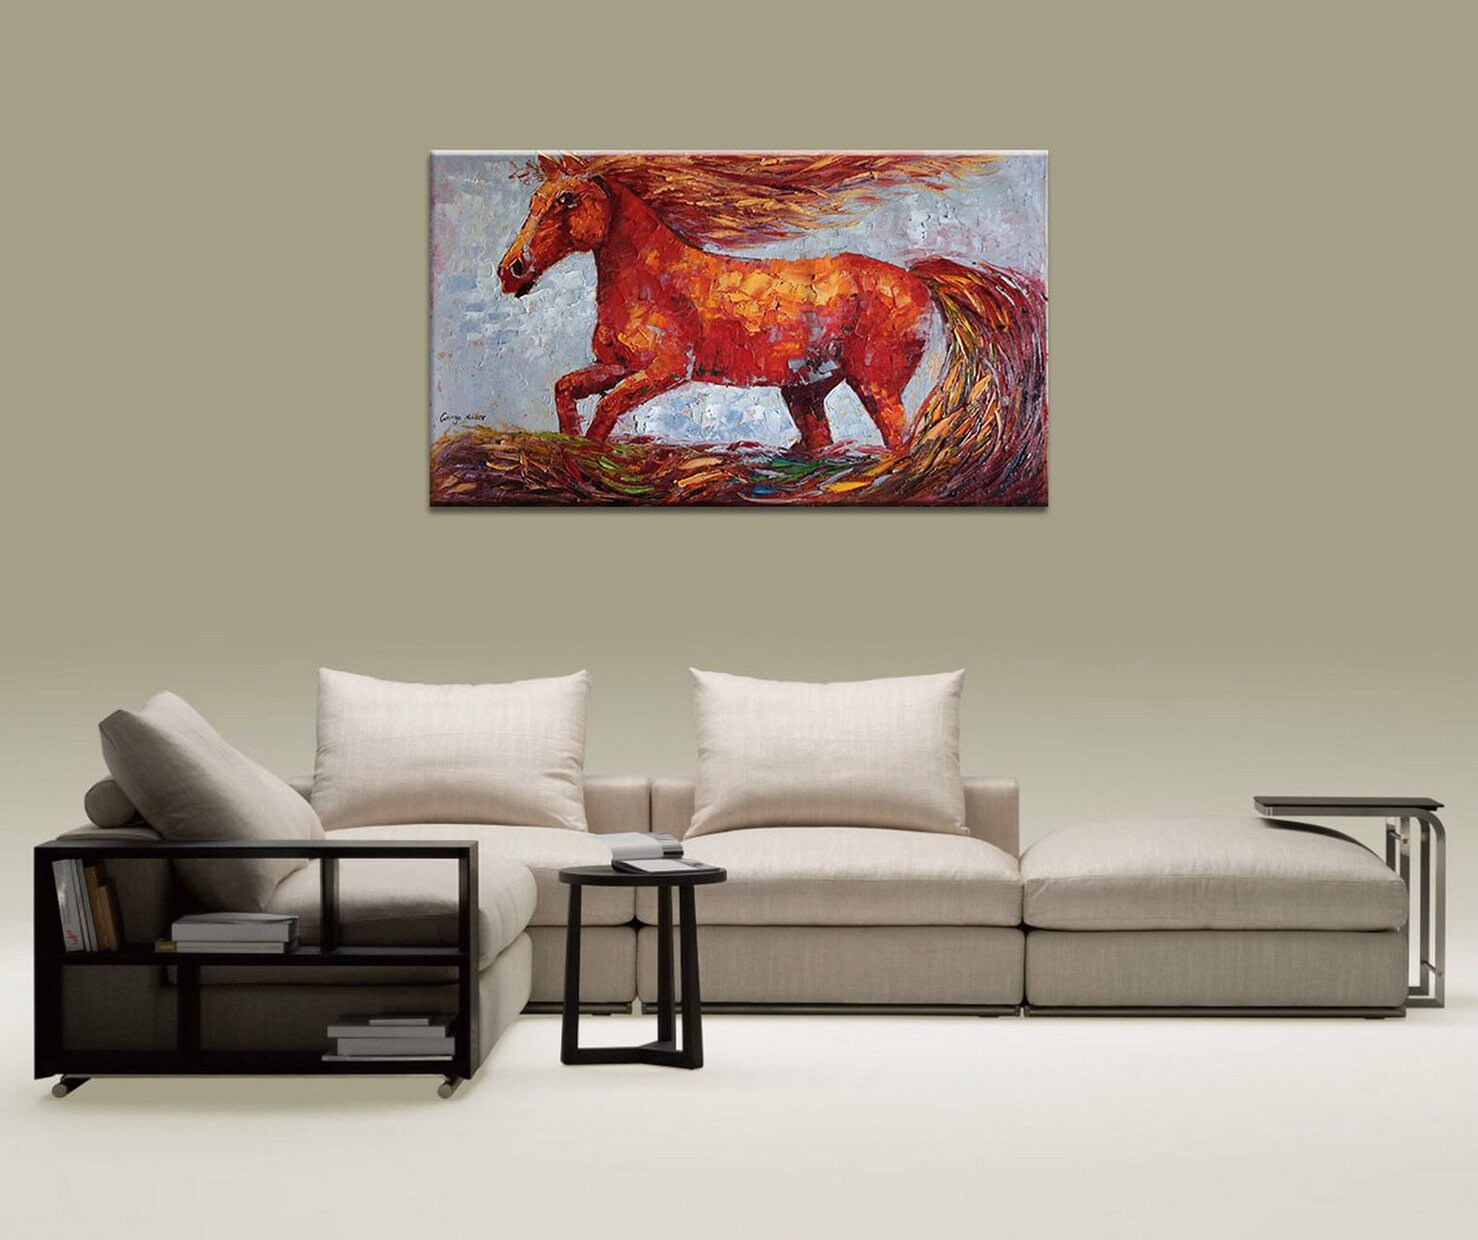 Horse Oil Painting, Palette Knife Oil Painting, Large Horse Art, Coffee Wall Art, Abstract Oil Painting, Living Room Wall Art, Horses Art